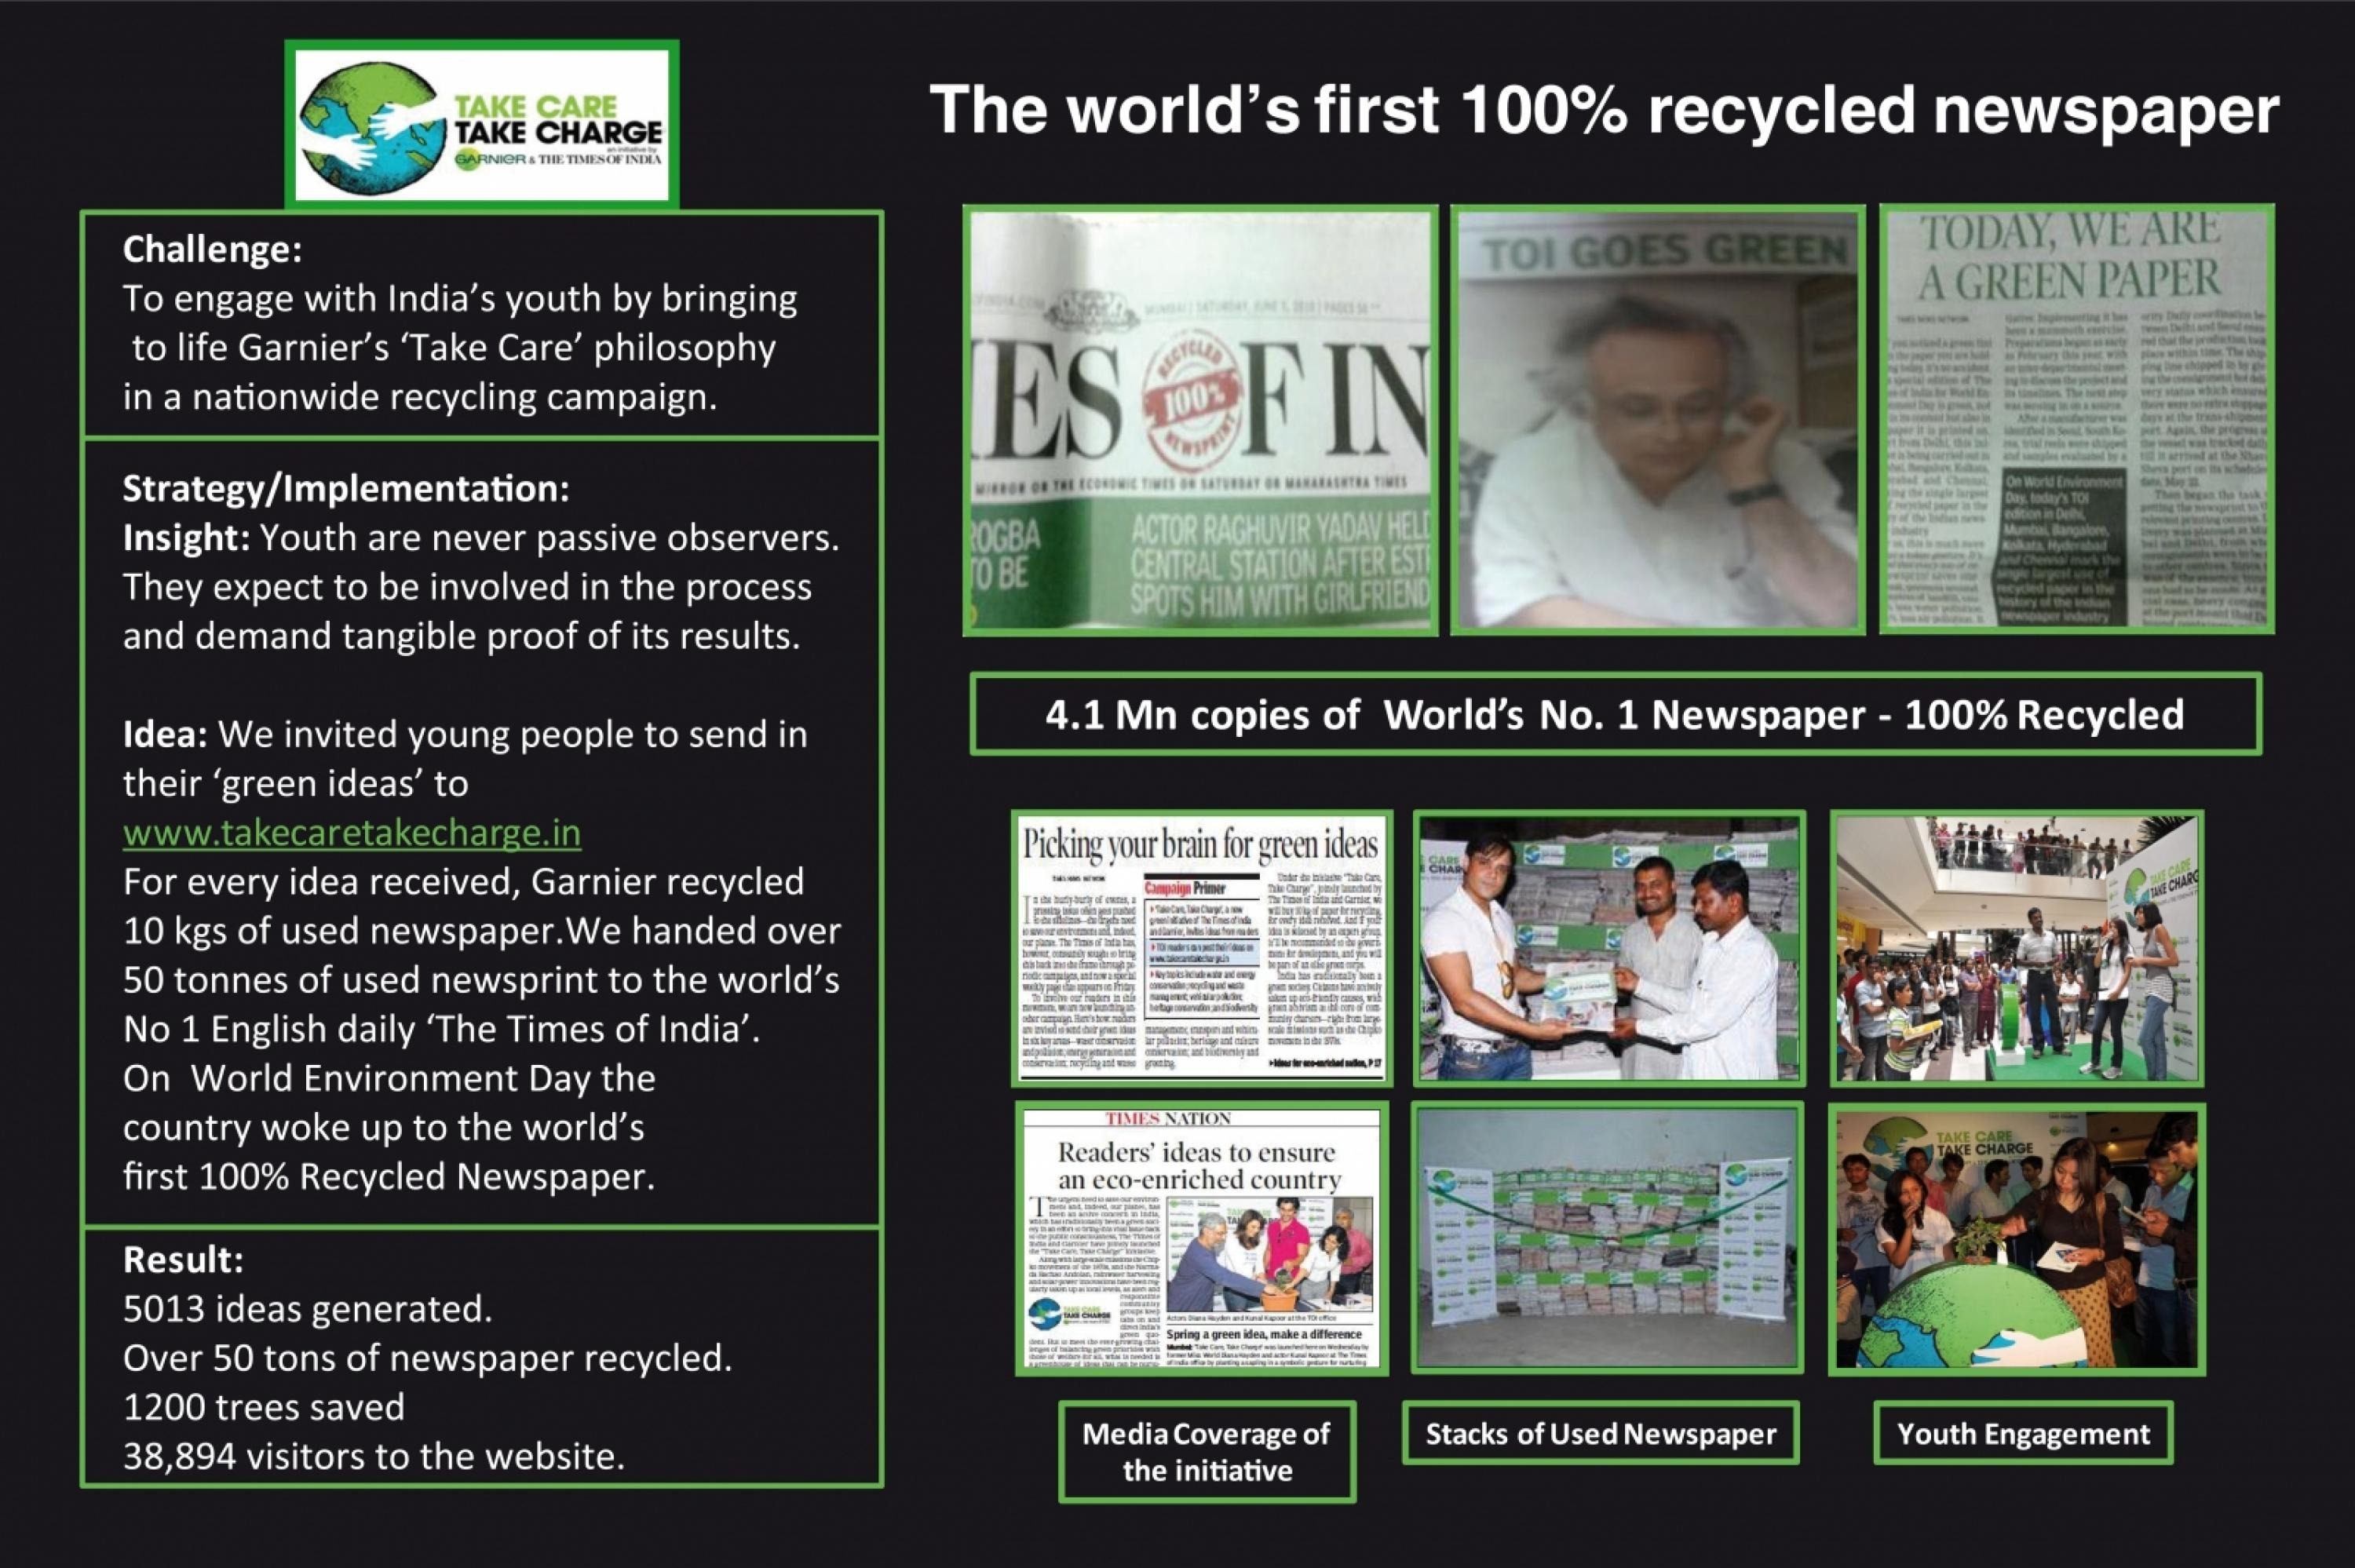 THE WORLD'S FIRST NEWSPAPER ON 100% RECYCLED NEWSPRINT